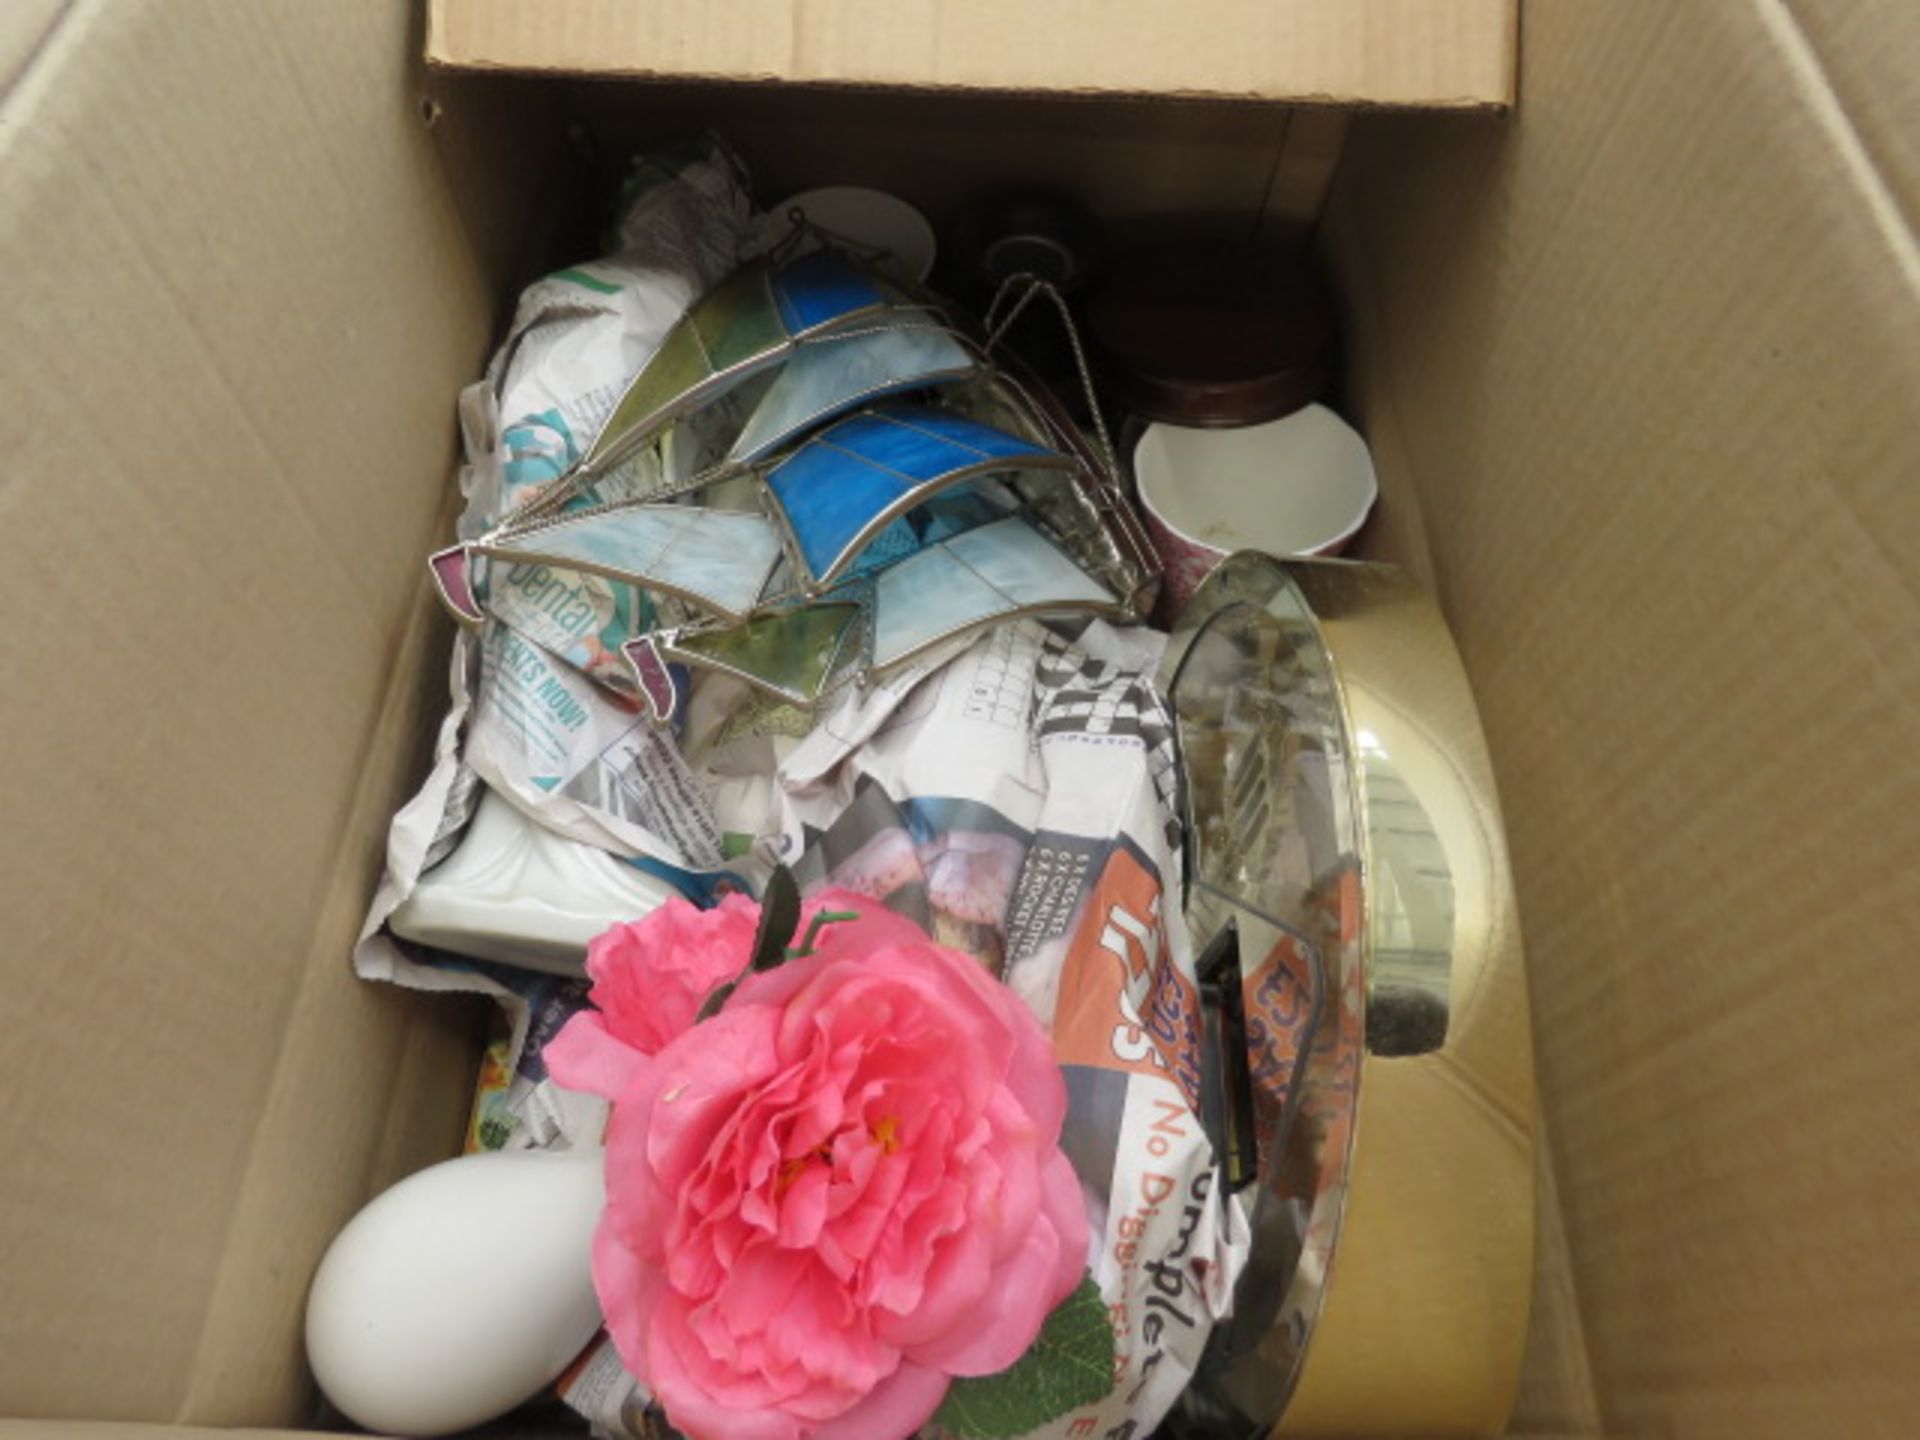 3 boxes and bag containing mini wicker baskets, quartz clock, ornamental ship, and crockery - Image 3 of 3